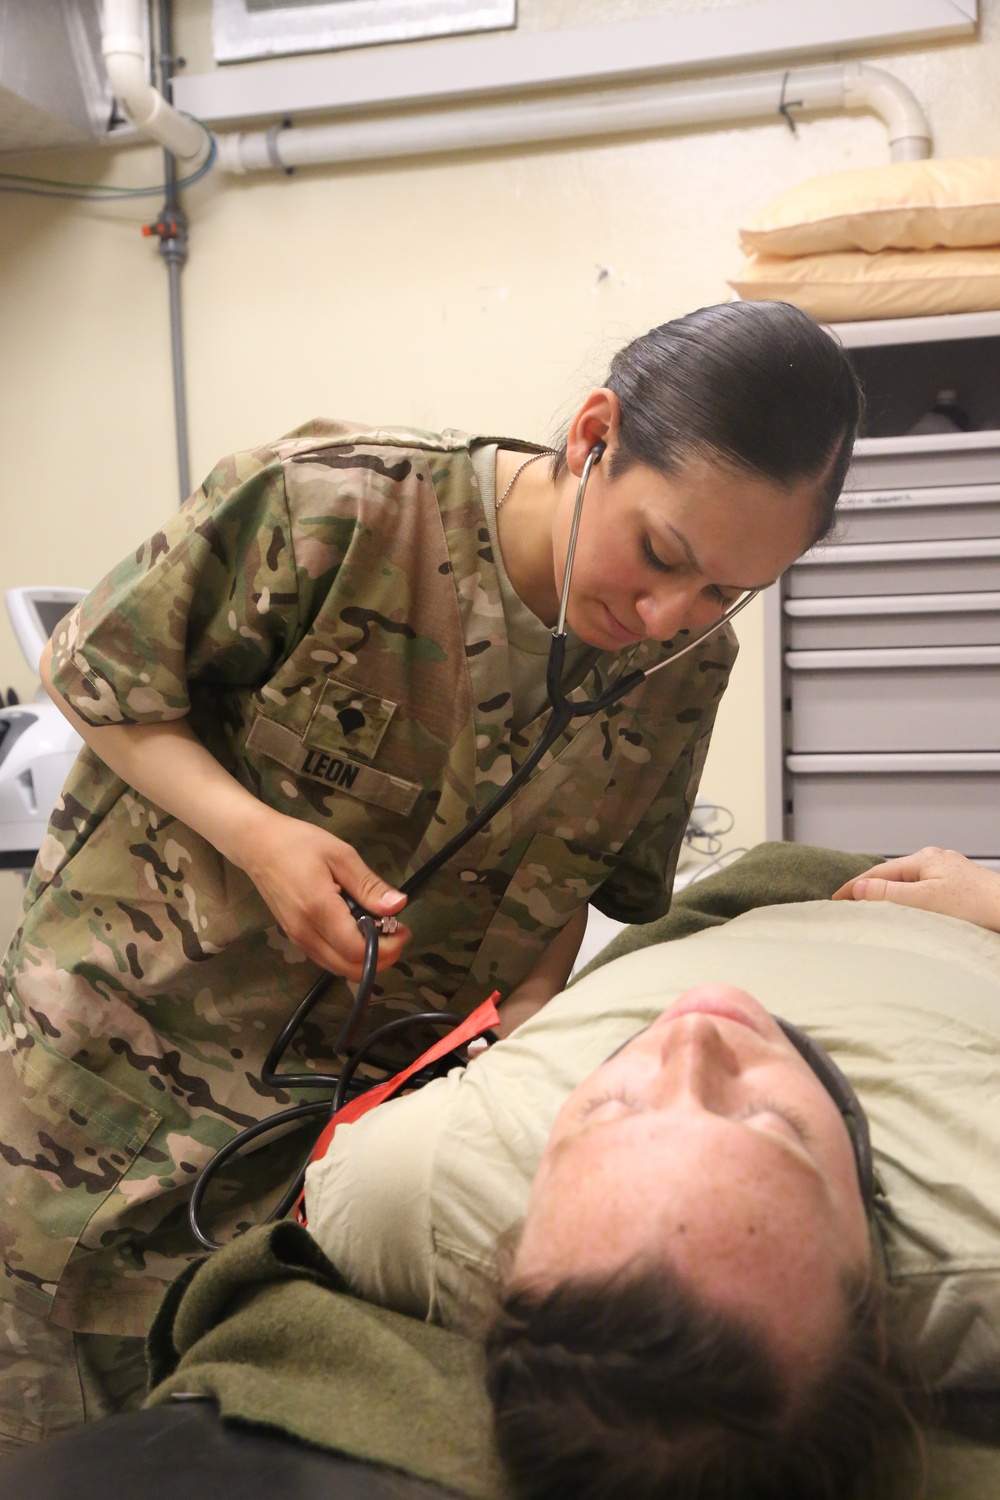 DVIDS - Images - Mass casualty exercise [Image 9 of 17]